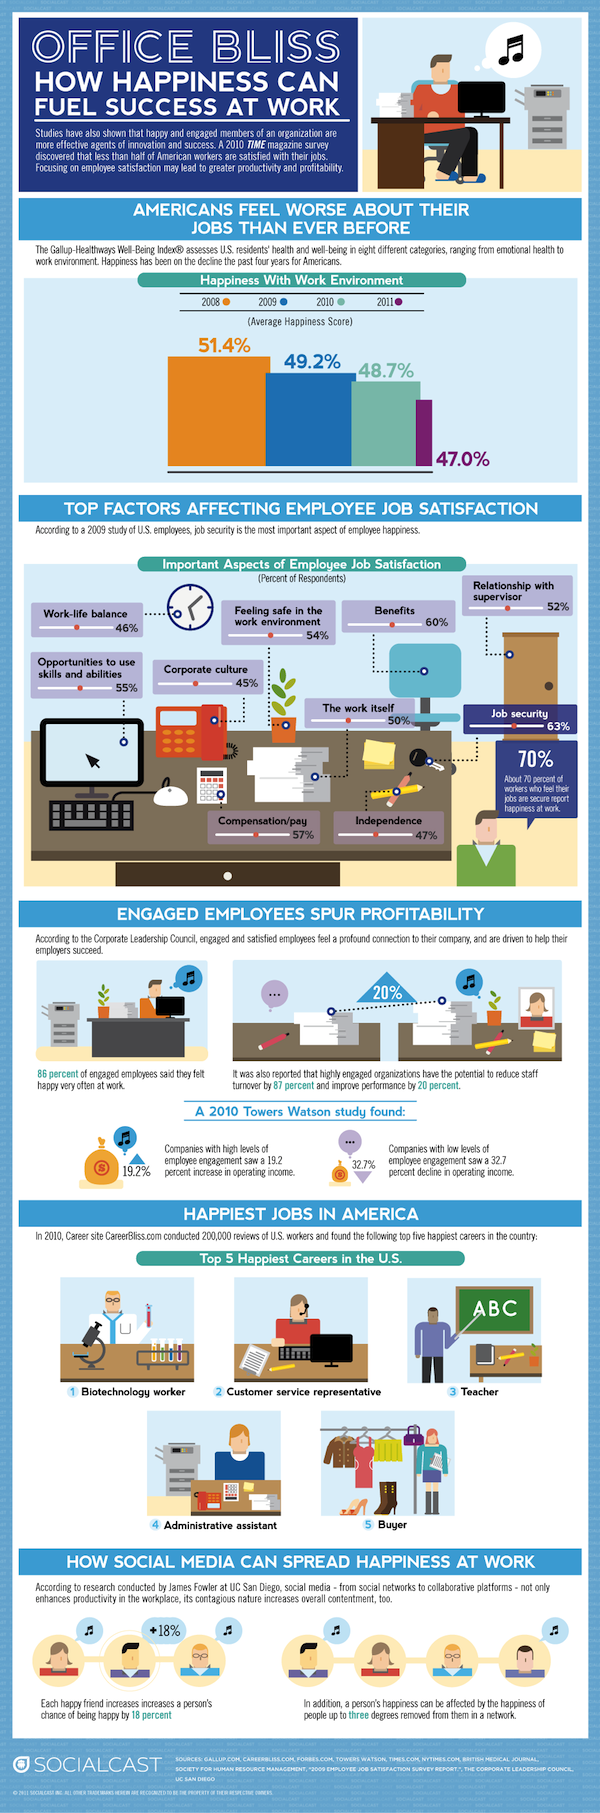 Happiness and Work Productivity [INFOGRAPHIC]